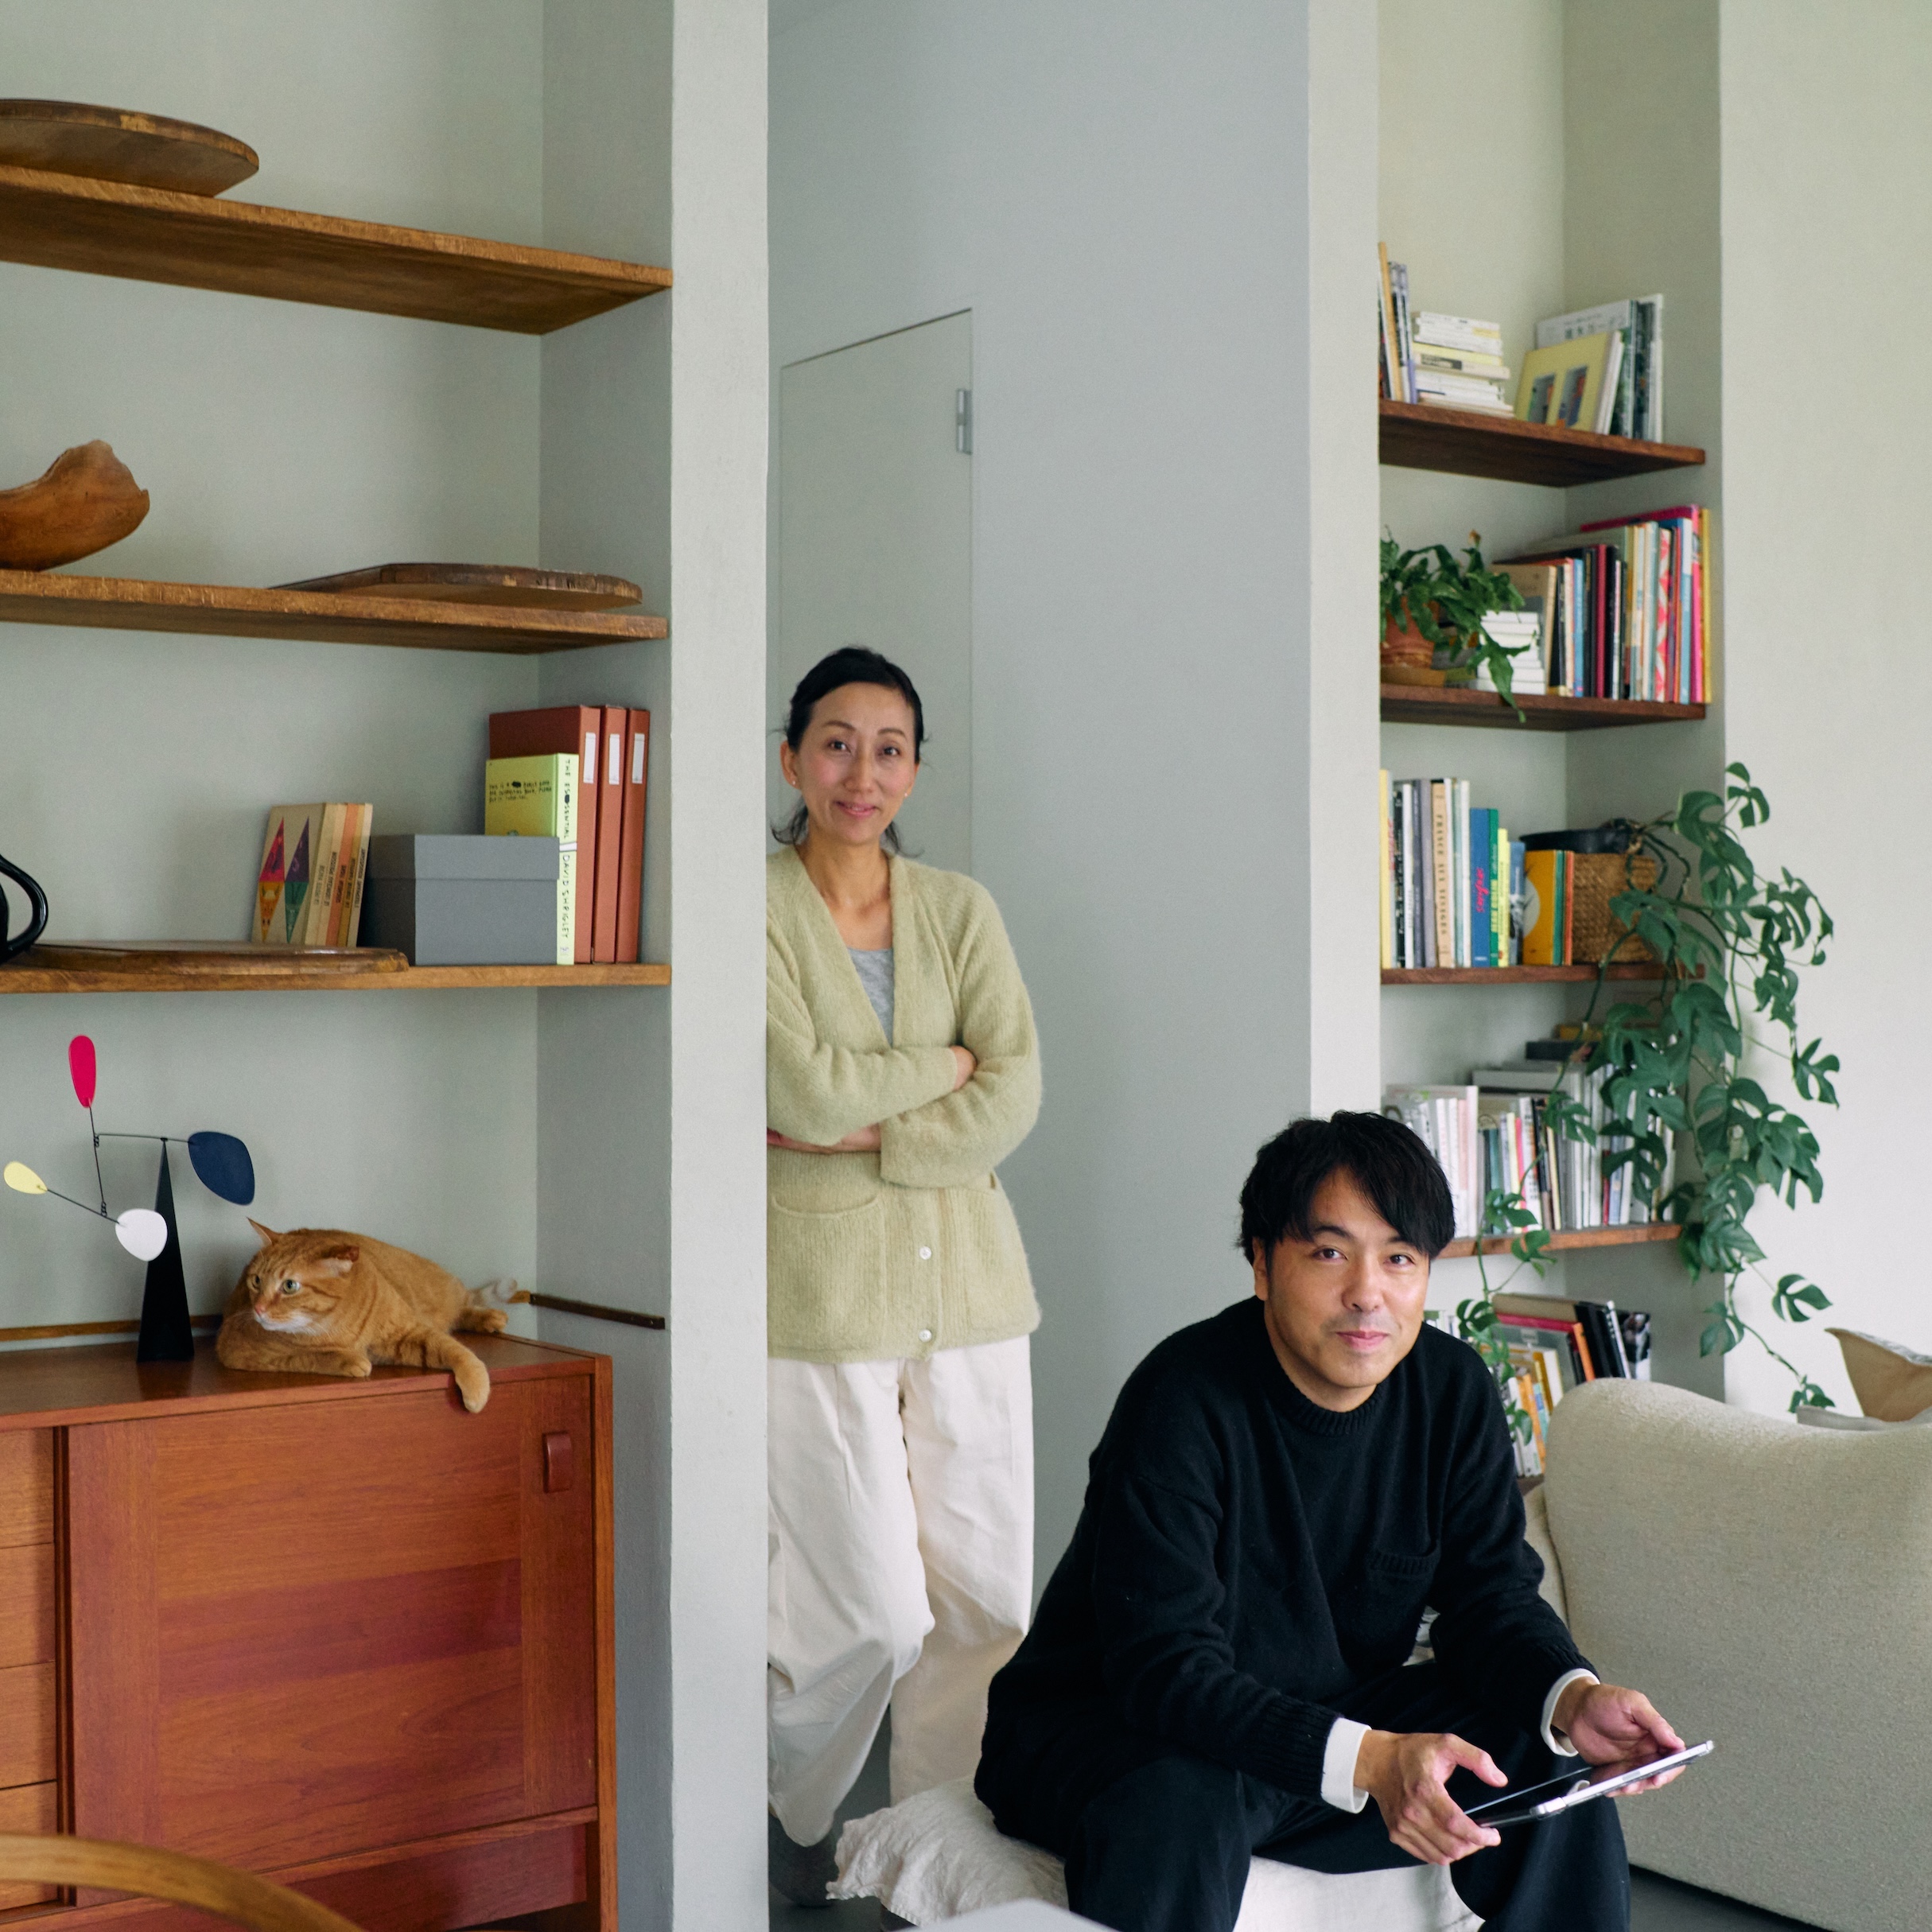 akira tani and kim hyunsook at home in the house they designed in tokyo. 321